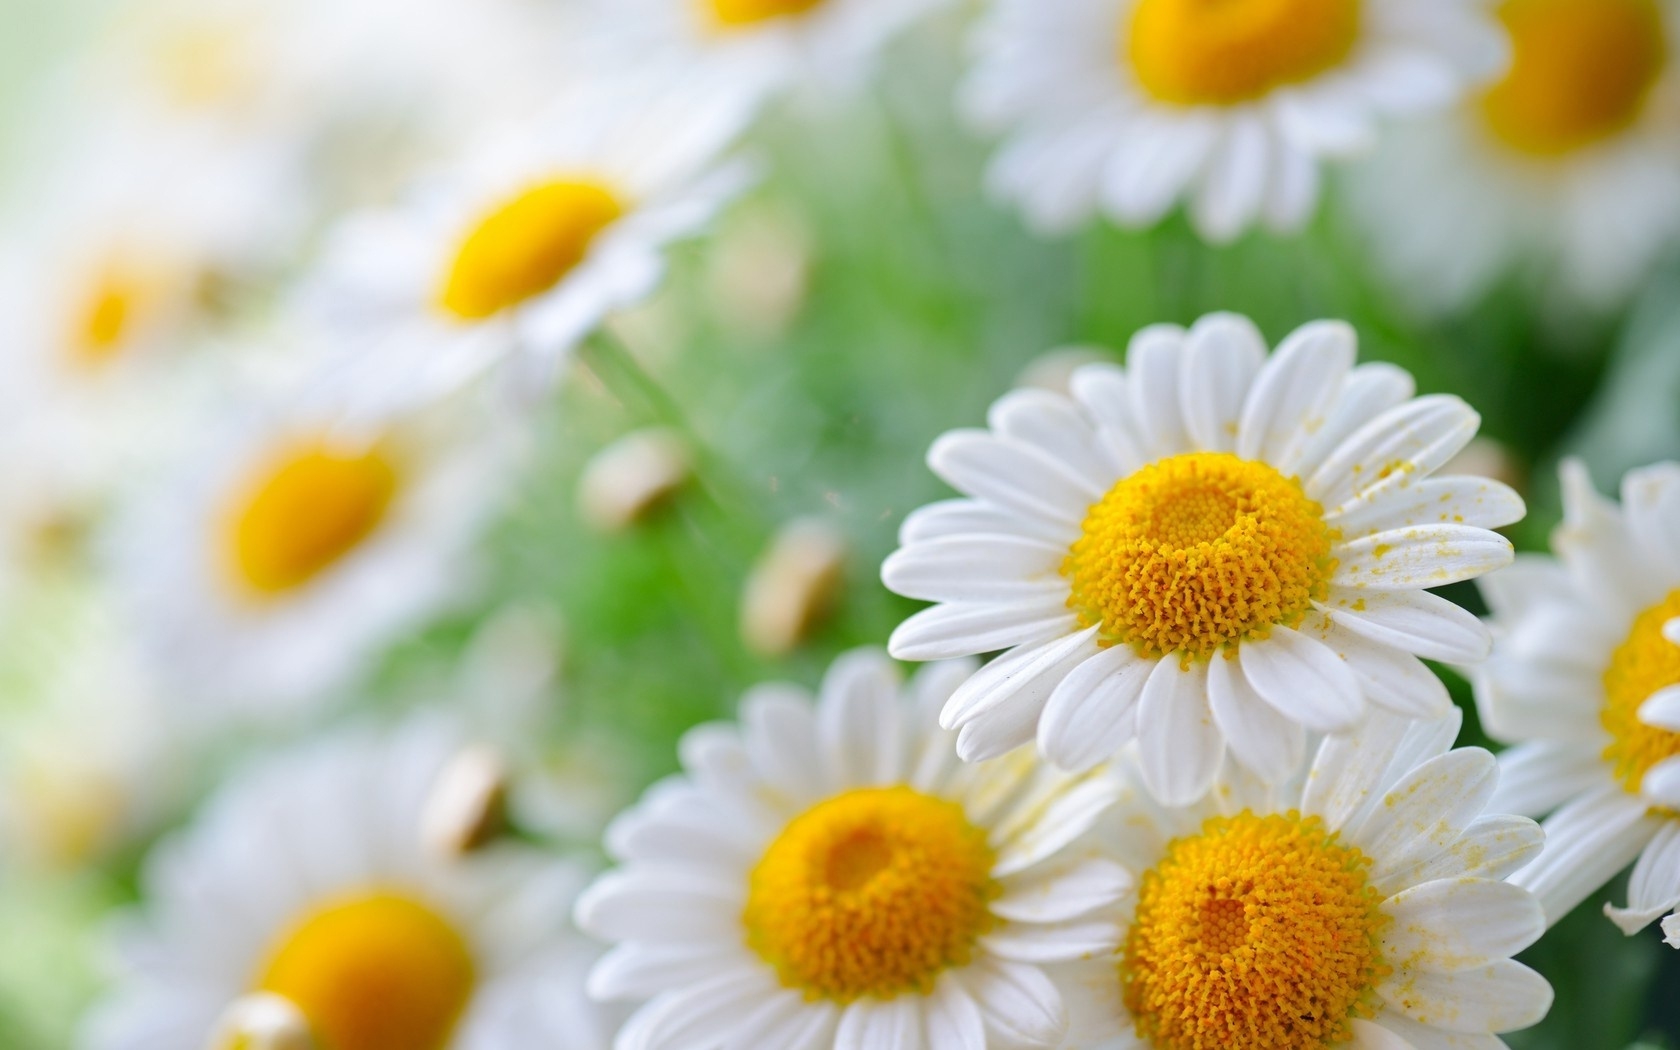 Chamomile - The national flower or Russia